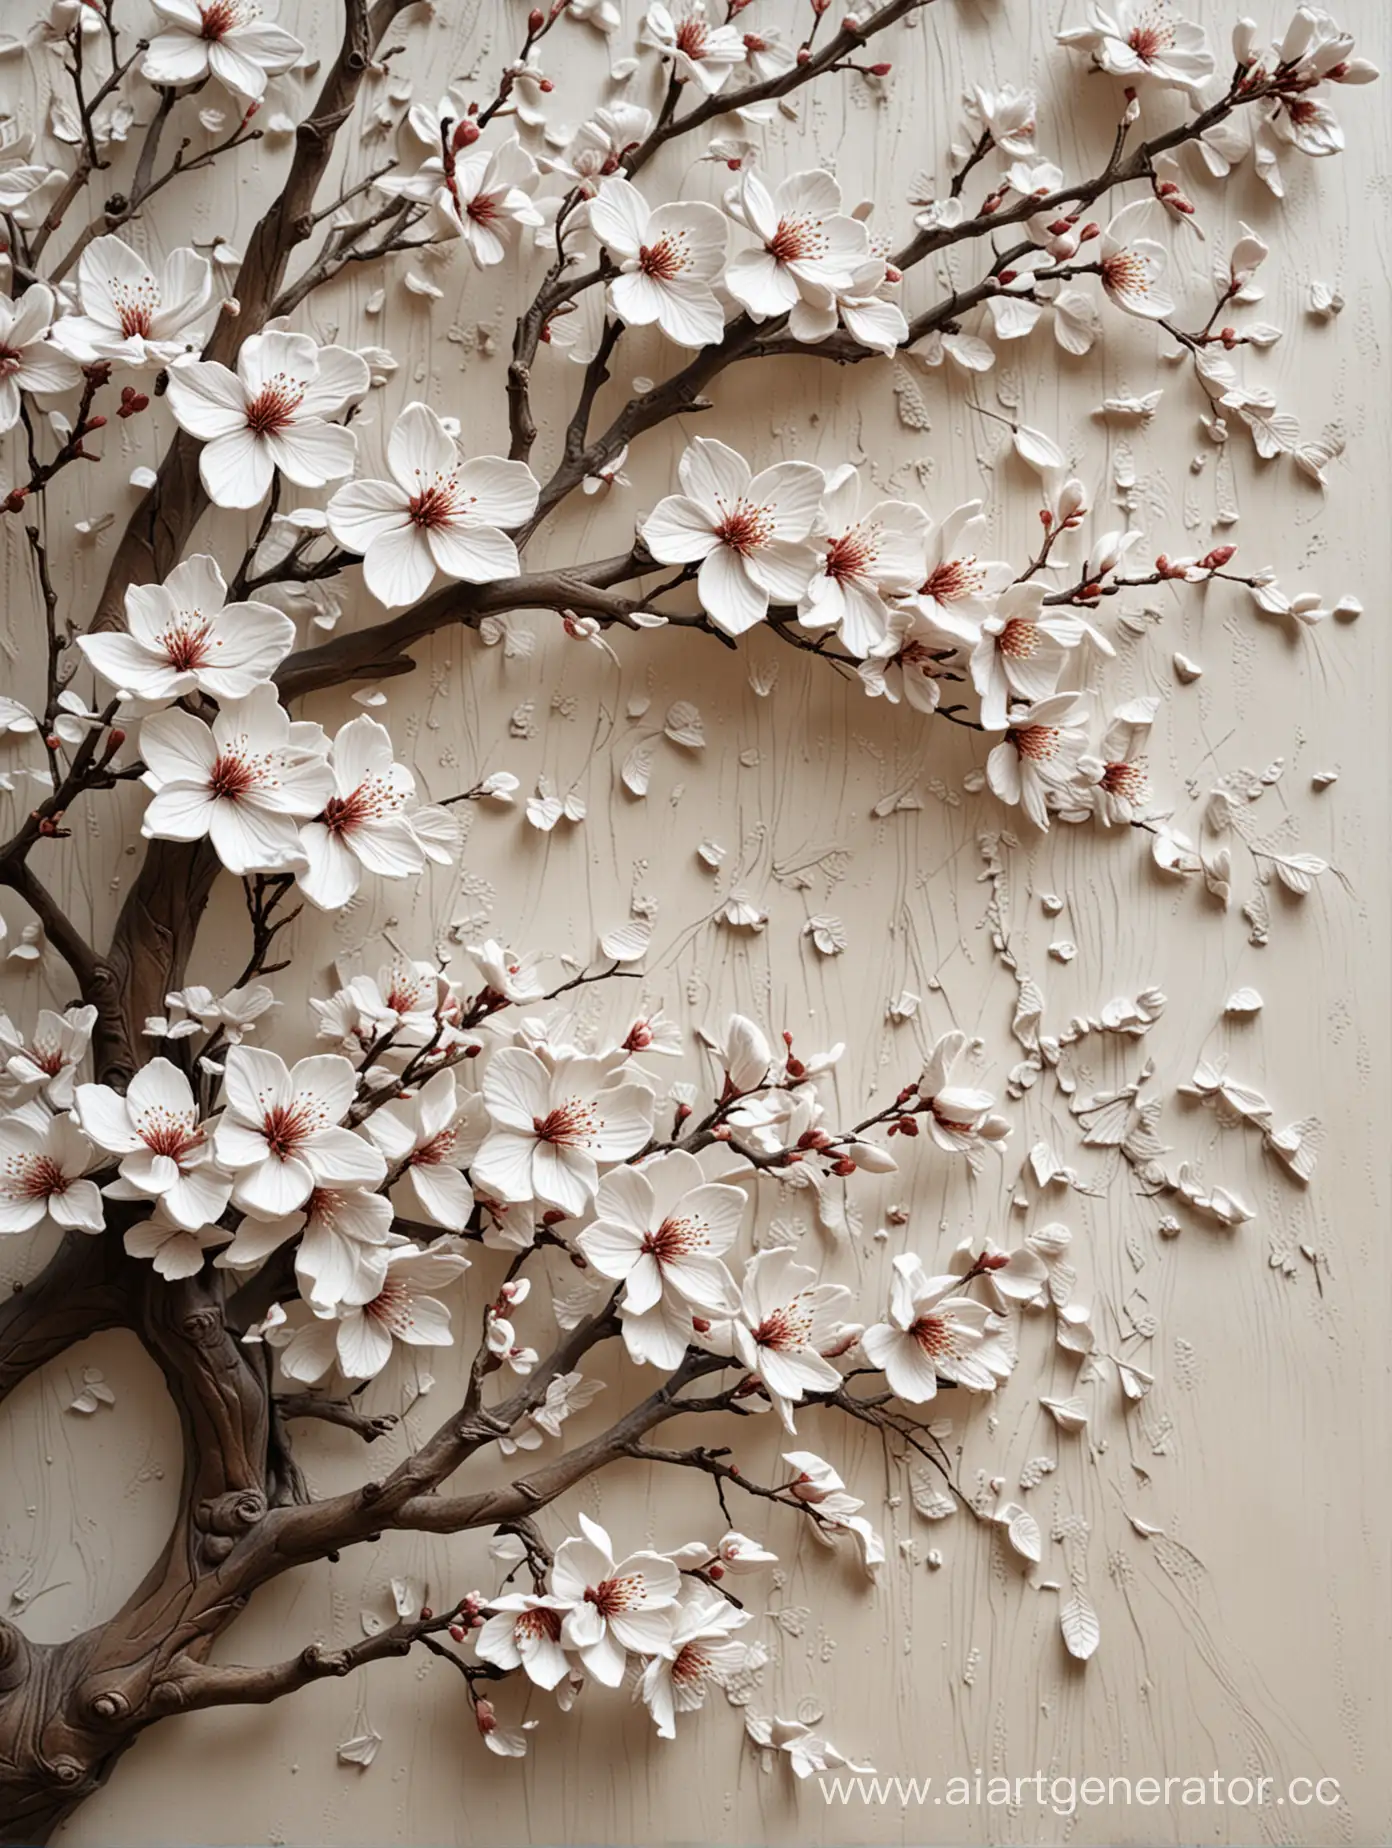 Ethereal-White-BasRelief-Sakura-Blossoms-on-Ancient-Branches